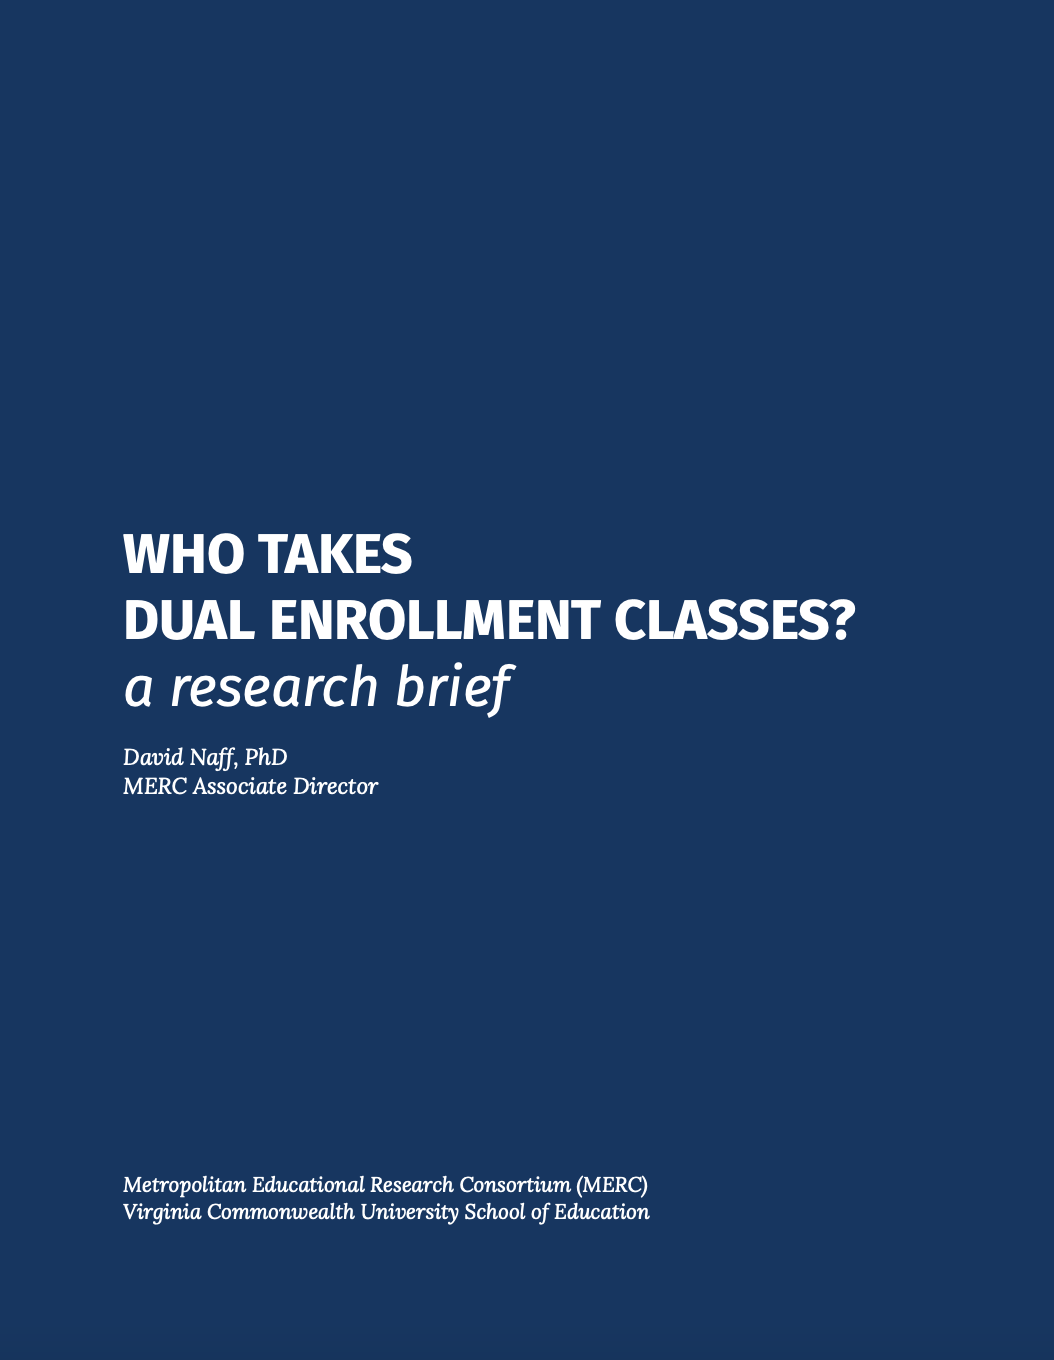 The cover of the MERC research brief on Dual Enrollment Classes